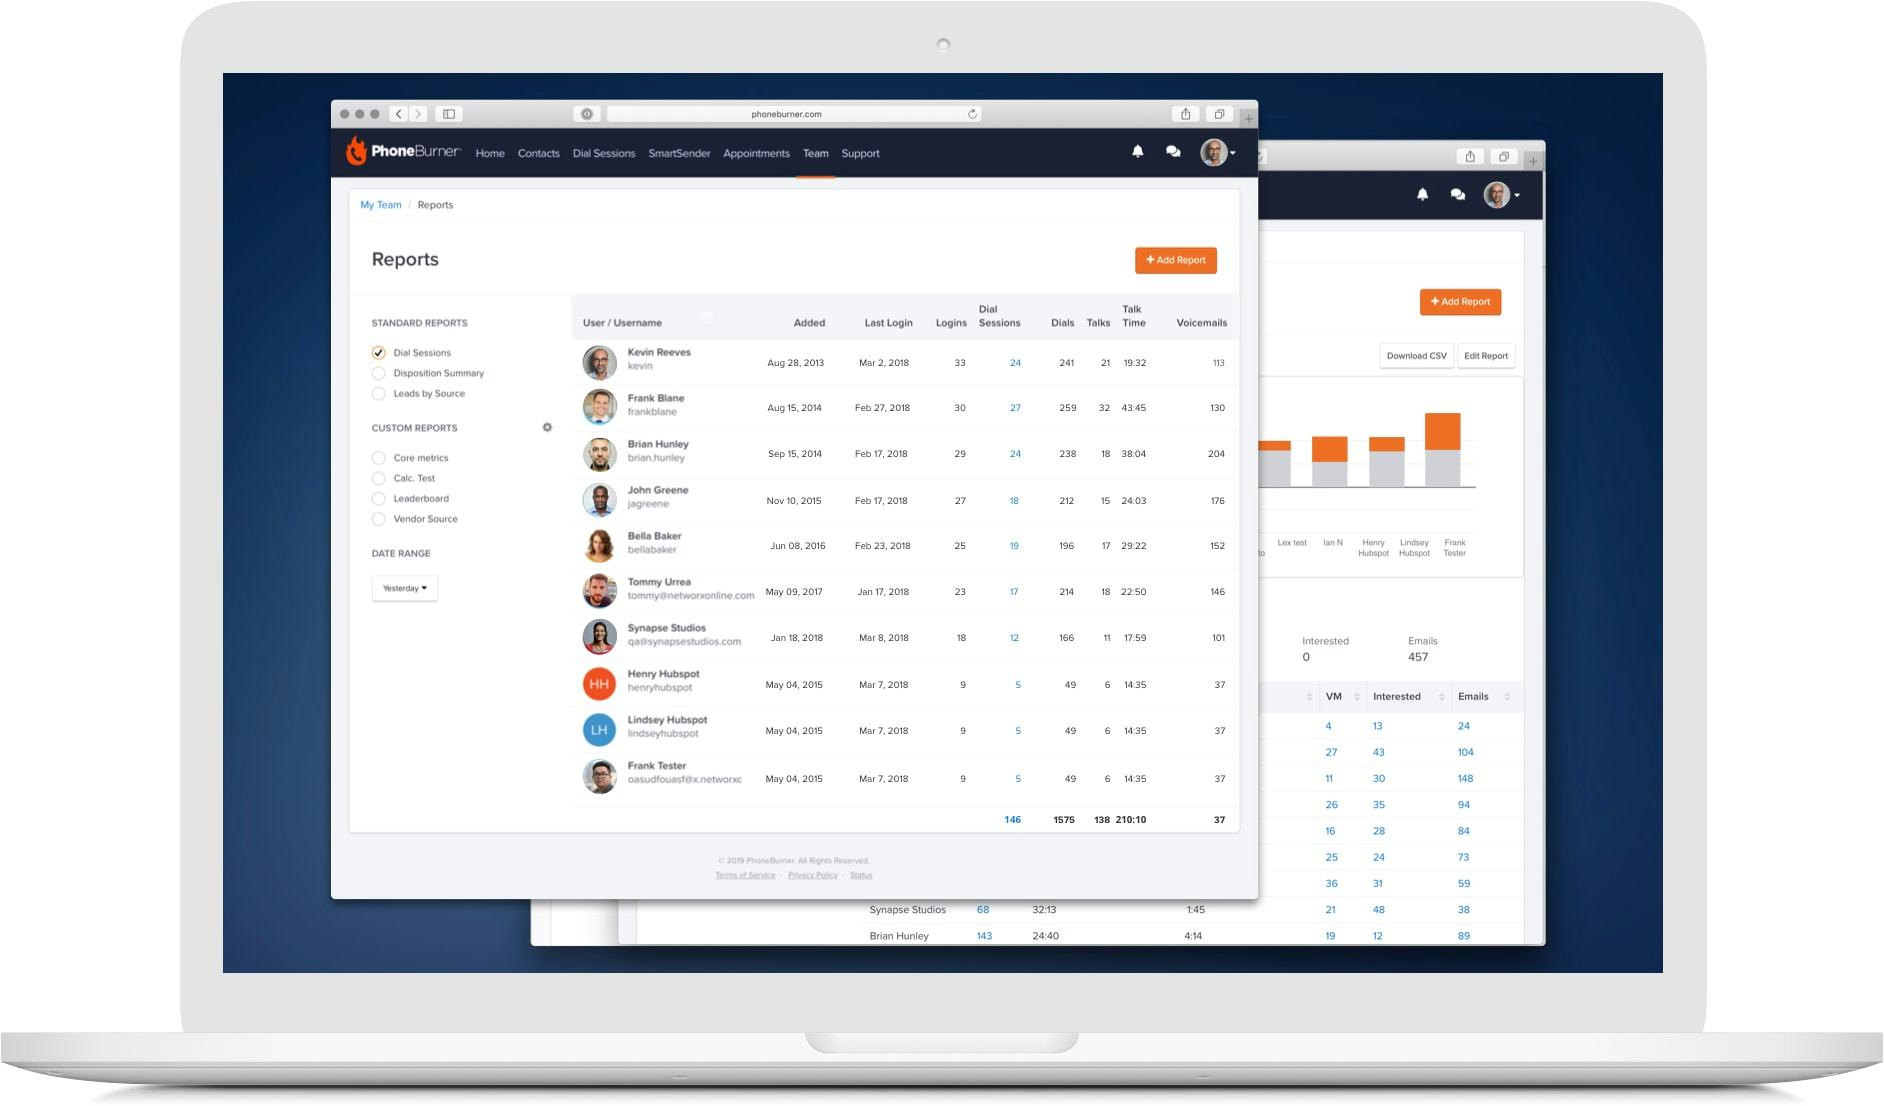 PhoneBurner Software - Create detailed reports to track agent and team performance using real-time and historical analytics. Plus, get live call monitoring, Whisper coaching, and Barge and help your team excel in real-time.